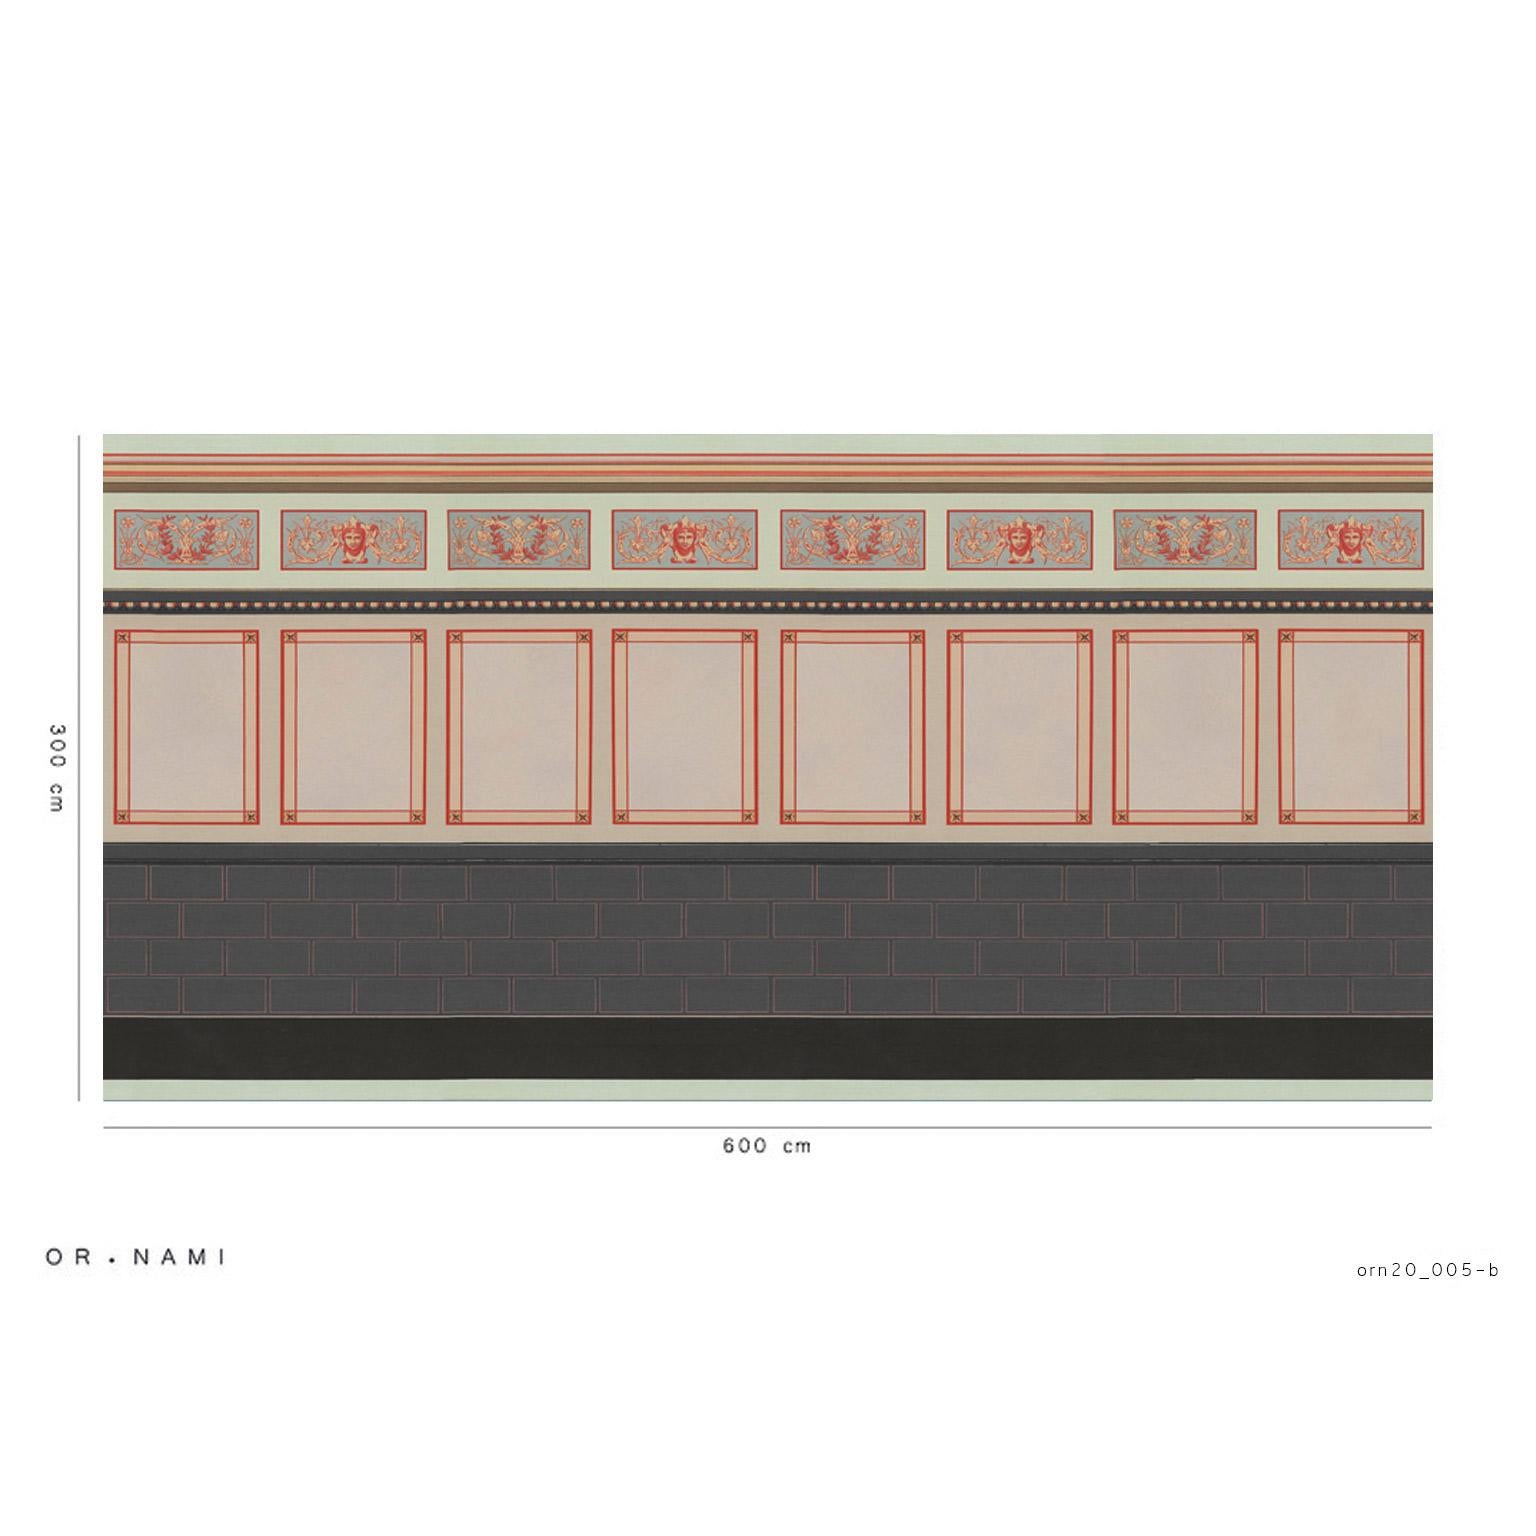 ORN20_005 
It is an homage to the early Pompeian style of frescoes present in many of the temples and residences in Pompeii and Herculaneum, which have survived to the present day in all their sumptuous beauty. Large geometric bands which imitate